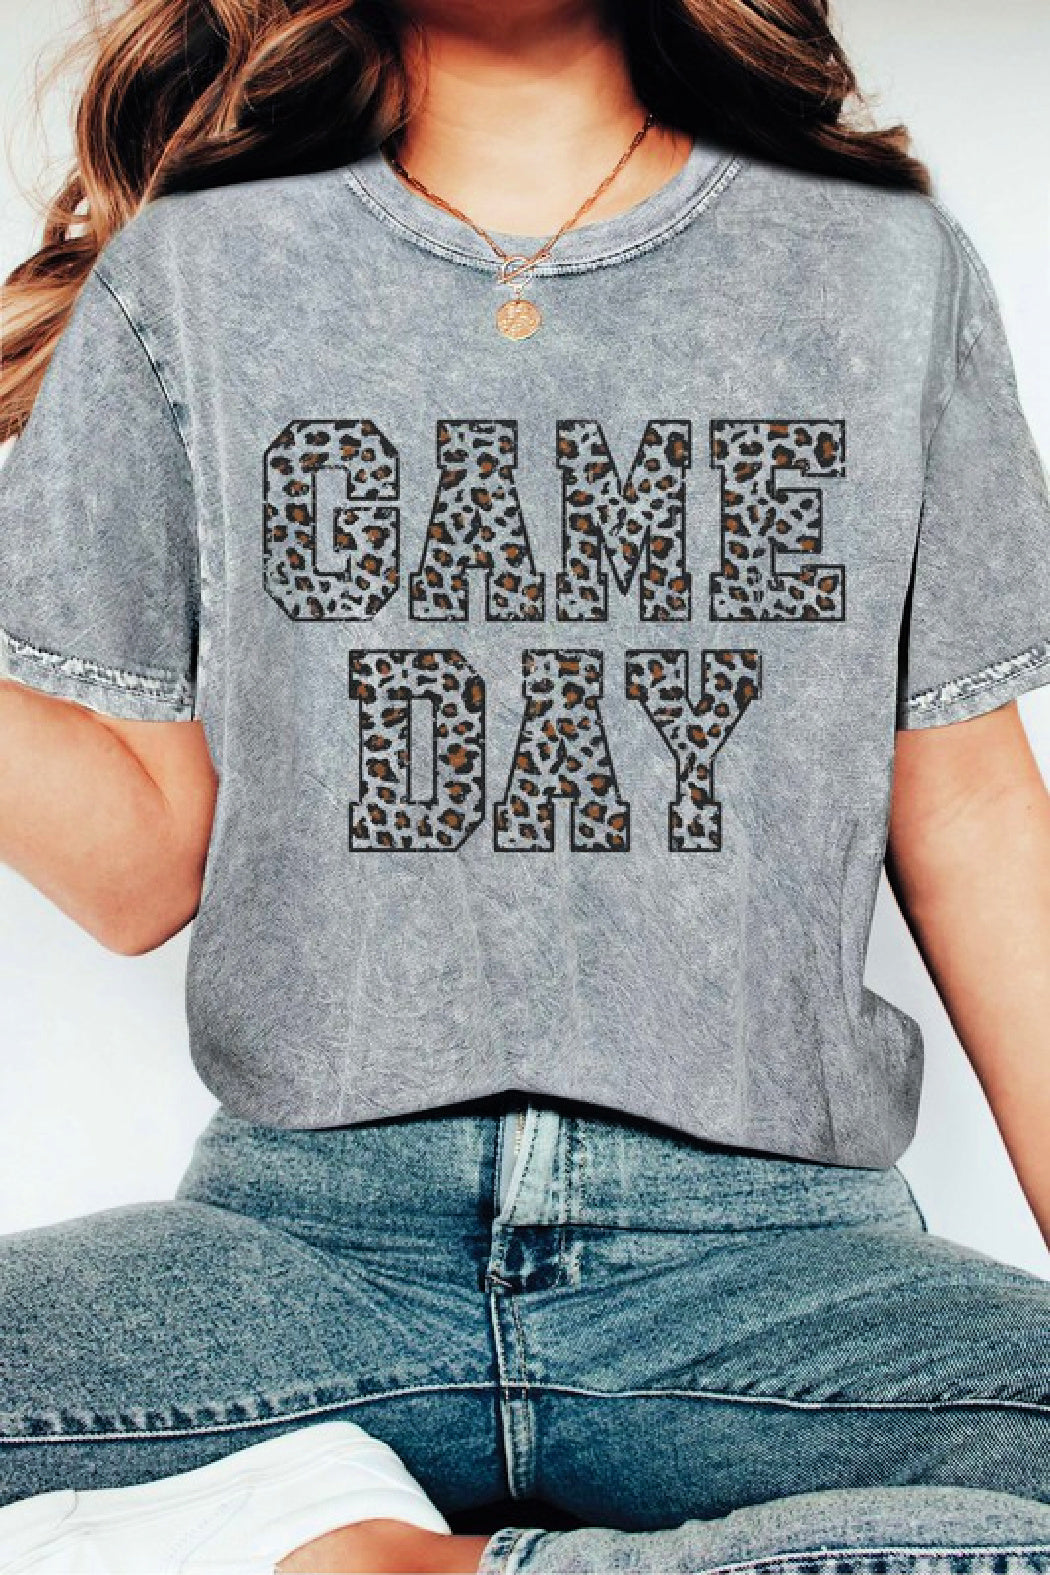 ON SALE!! Game Day Graphic Tee - Grey